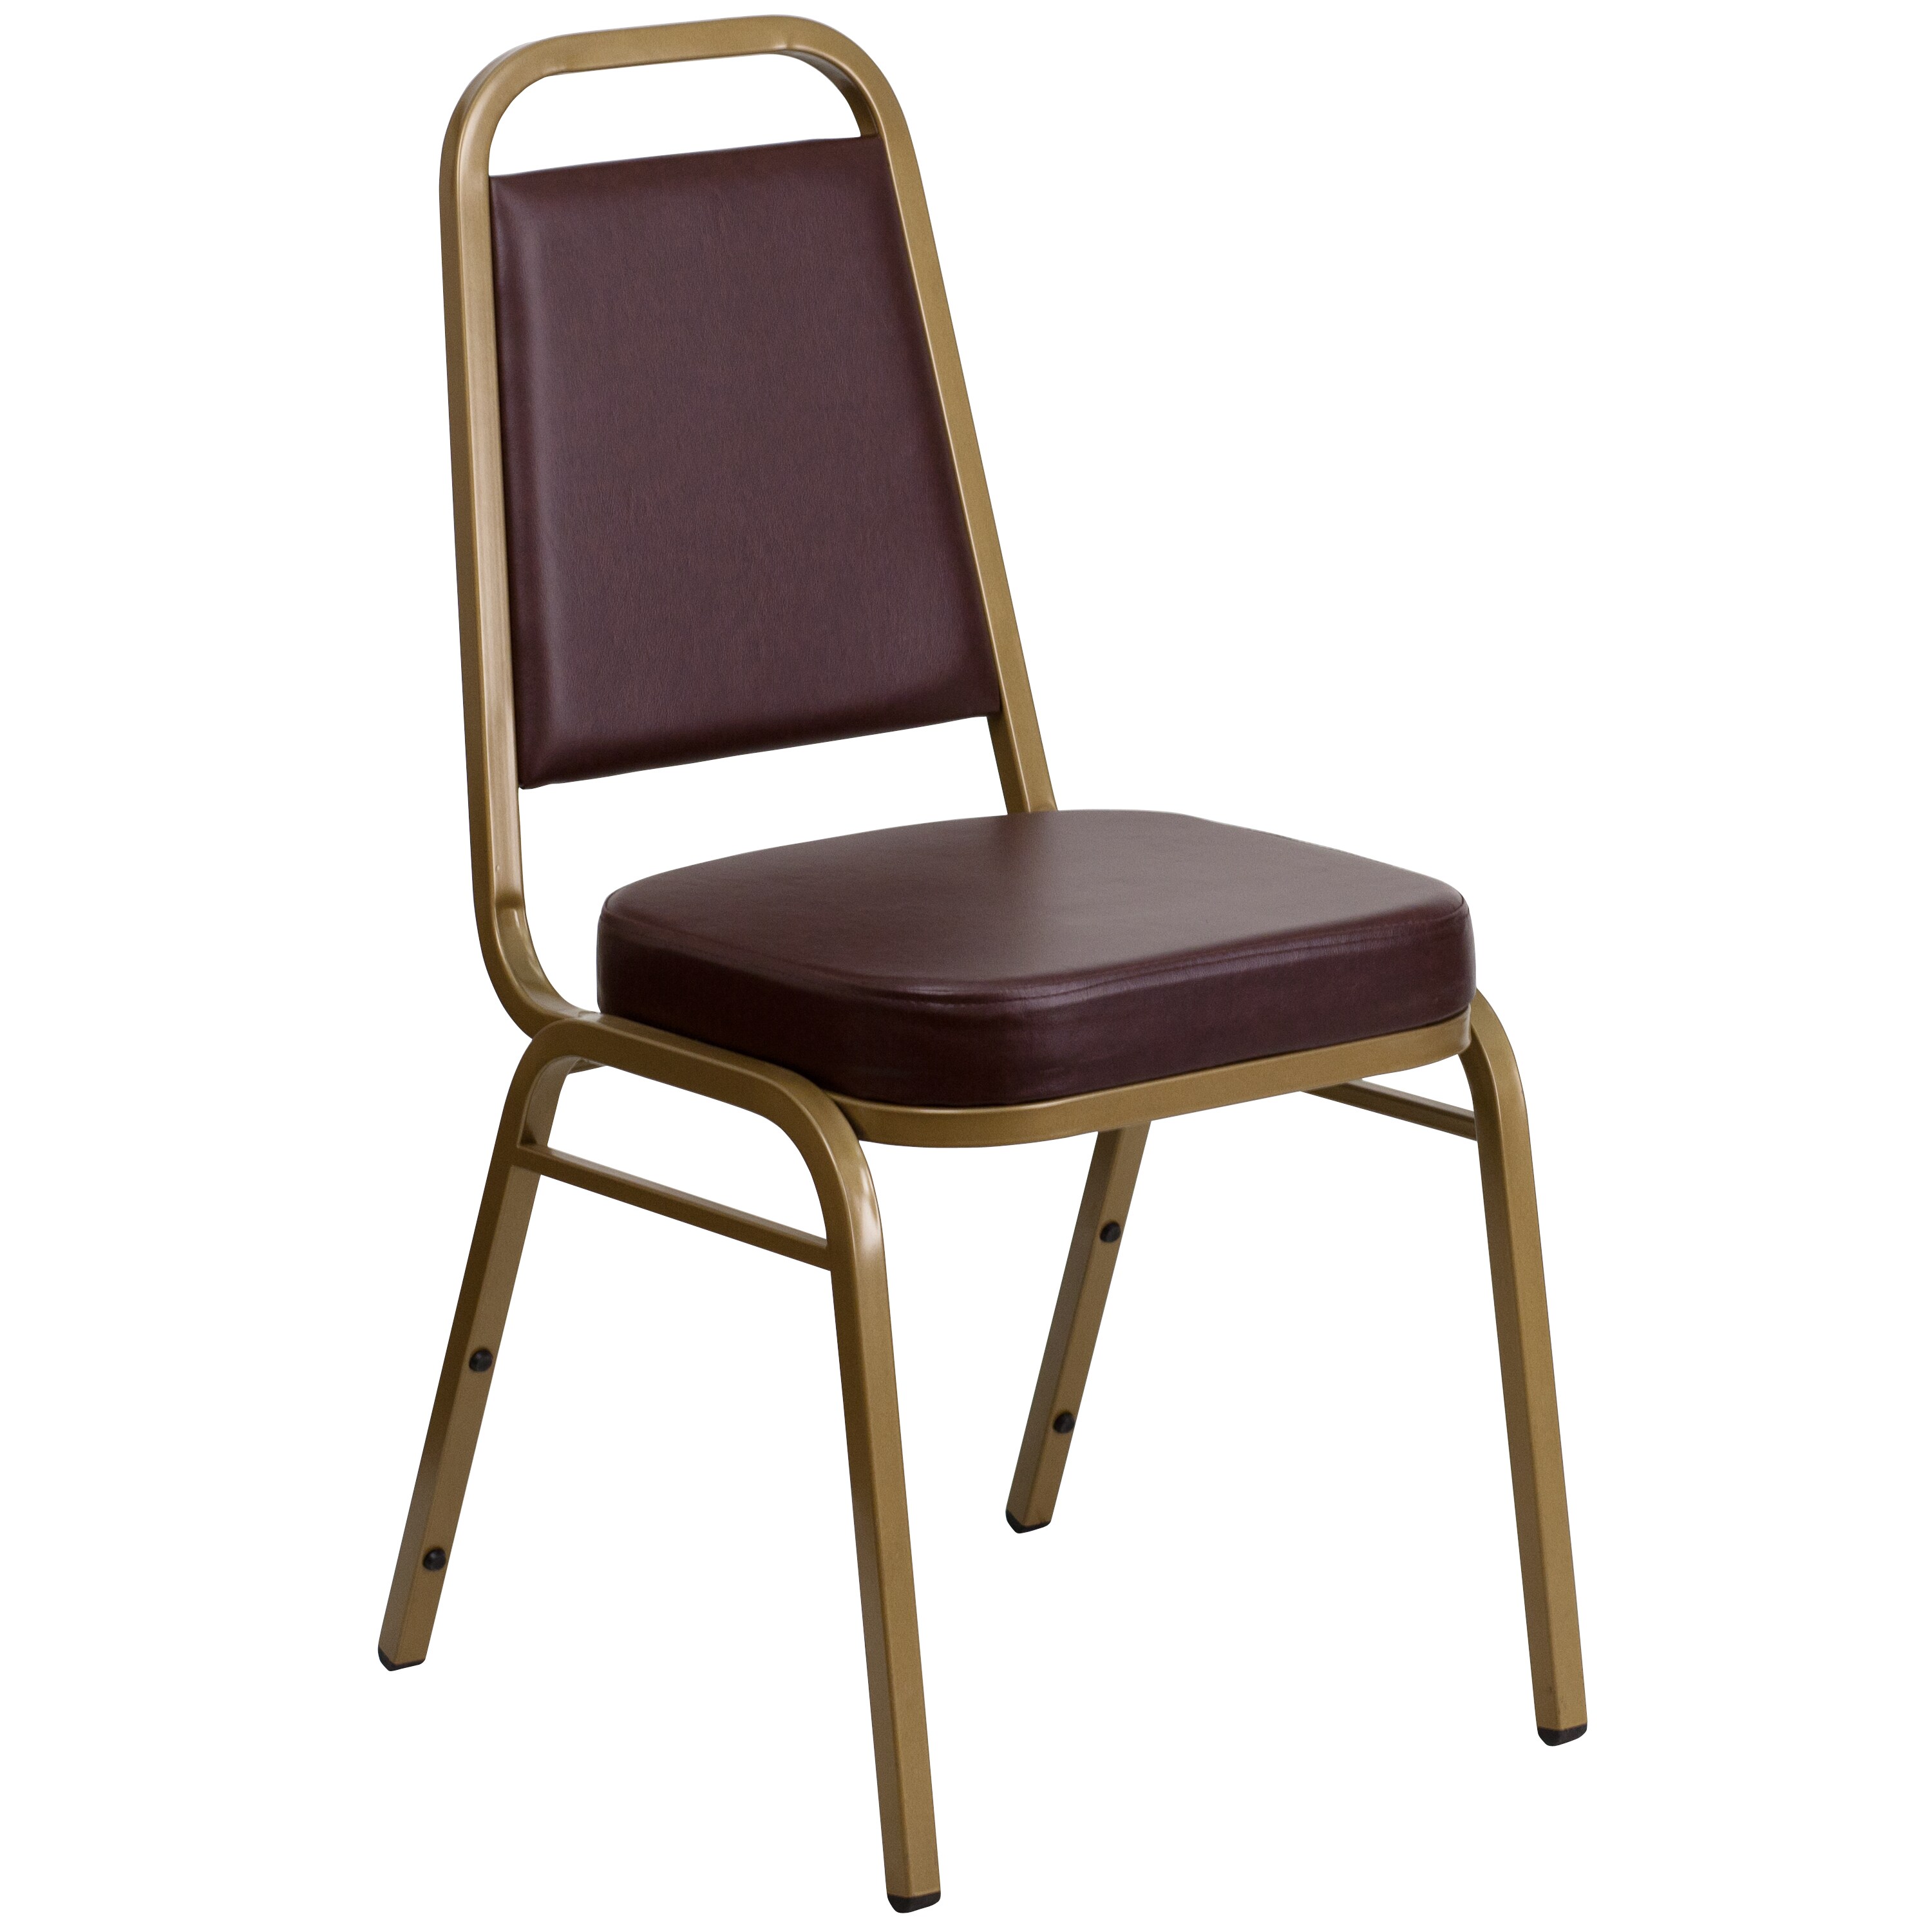 10 PACK Banquet Chair Burgundy Fabric Restaurant Chair Trapezoidal Back Stacking 